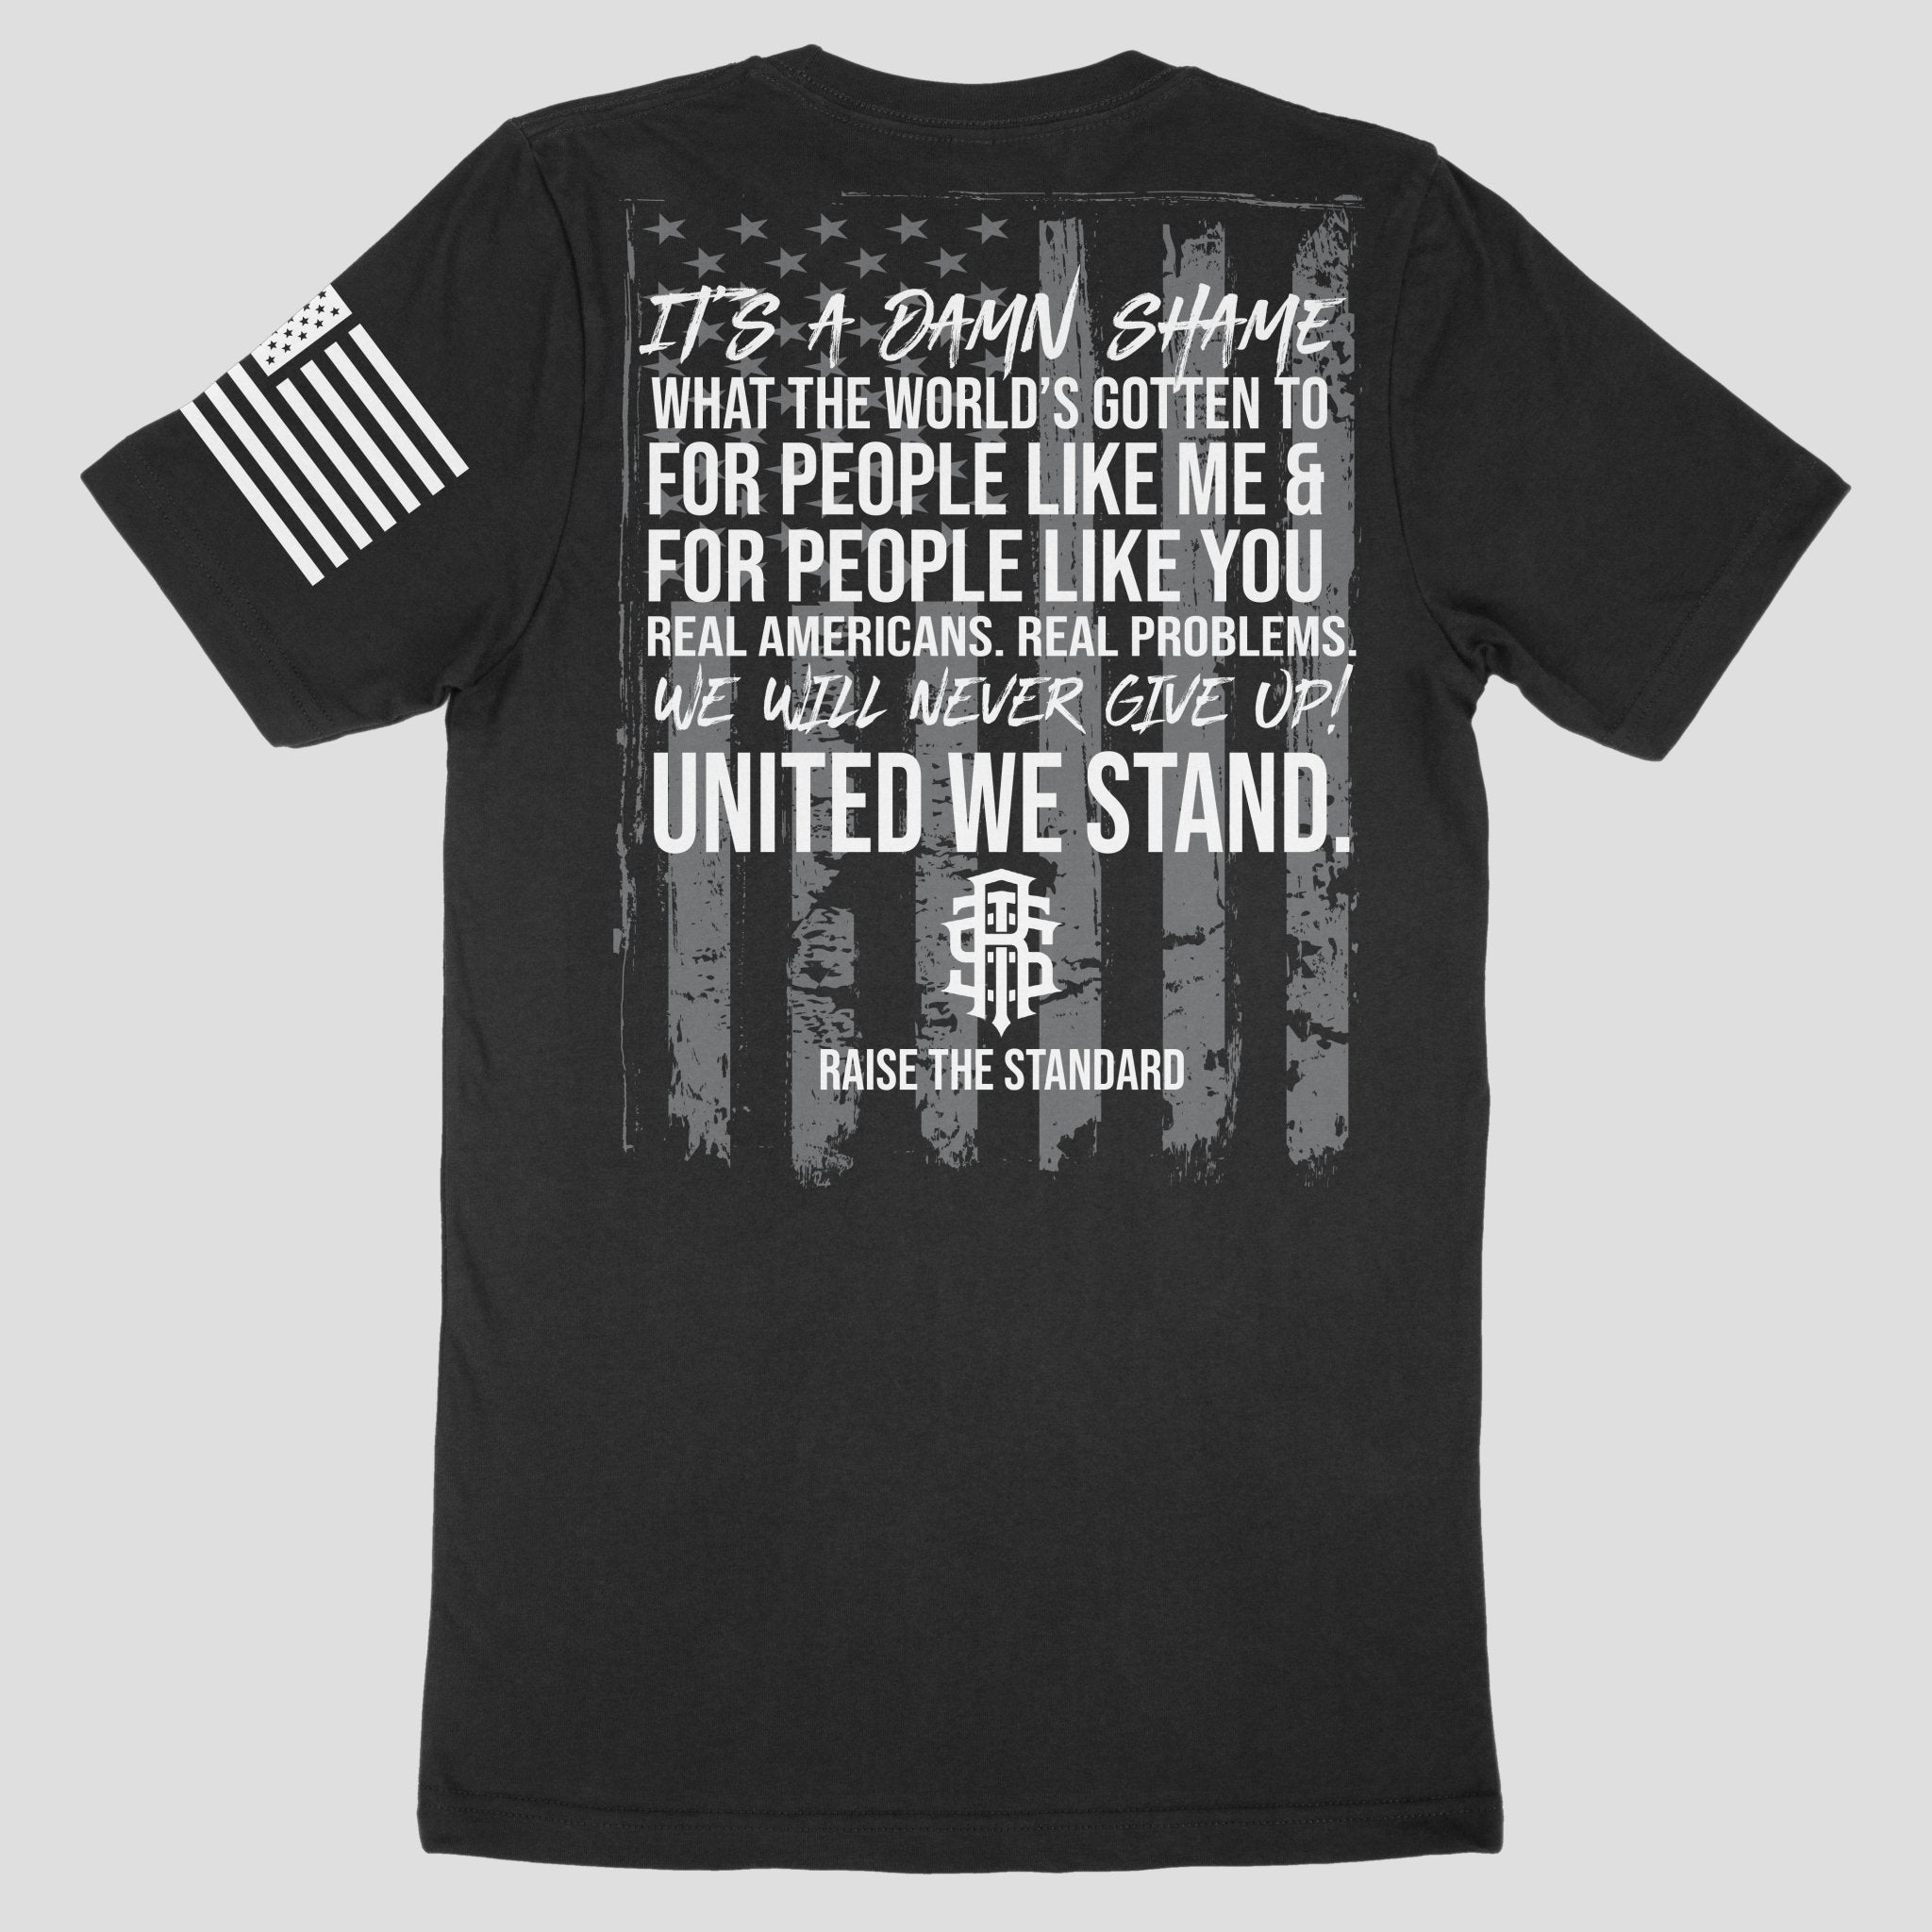 Real Americans. Real Problems. T-Shirt - Raise The Standard Apparel